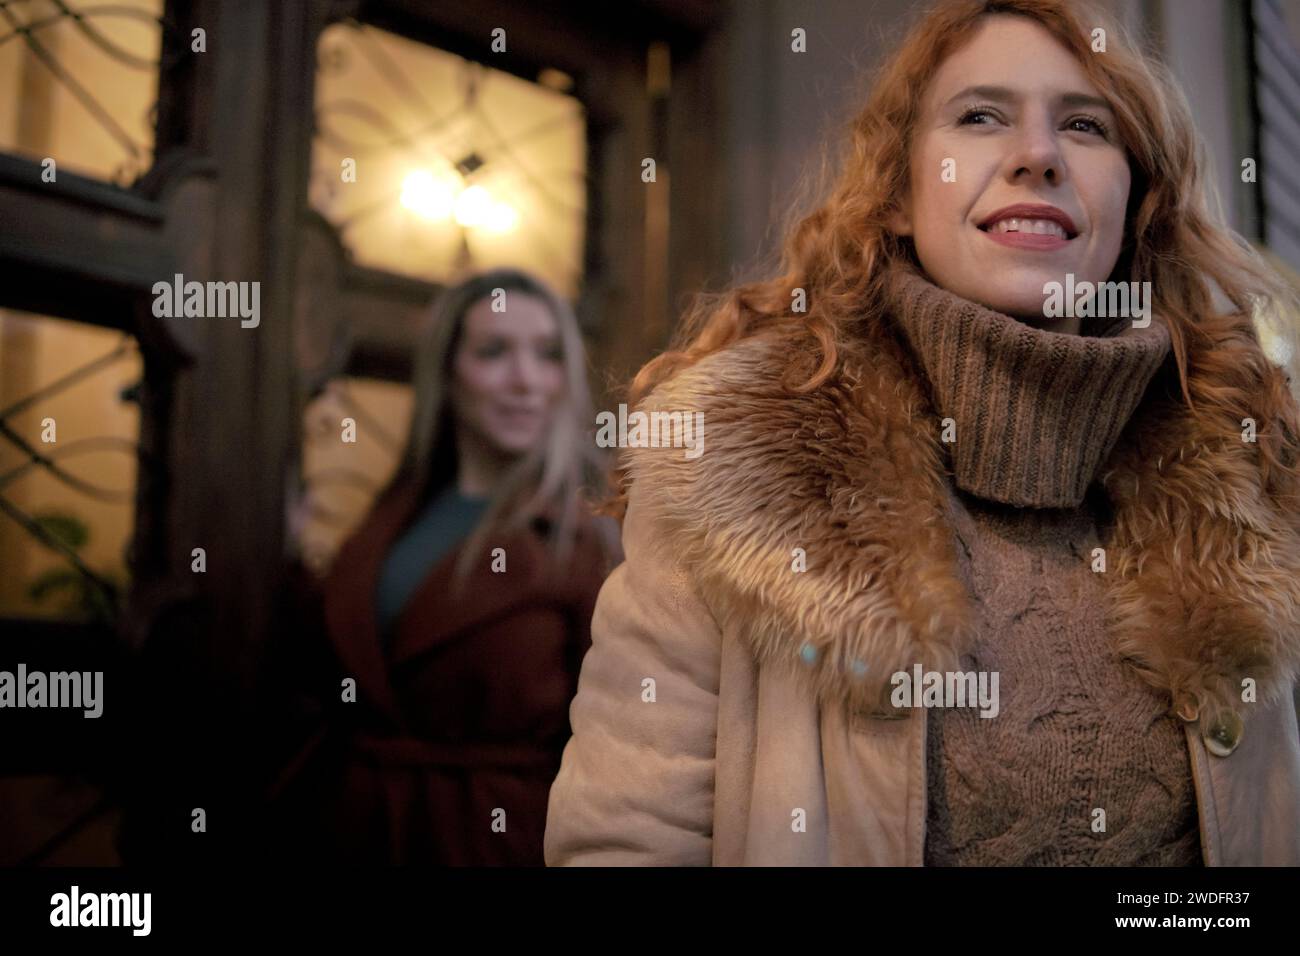 woman in foreground and woman in background out of photo in the city Stock Photo